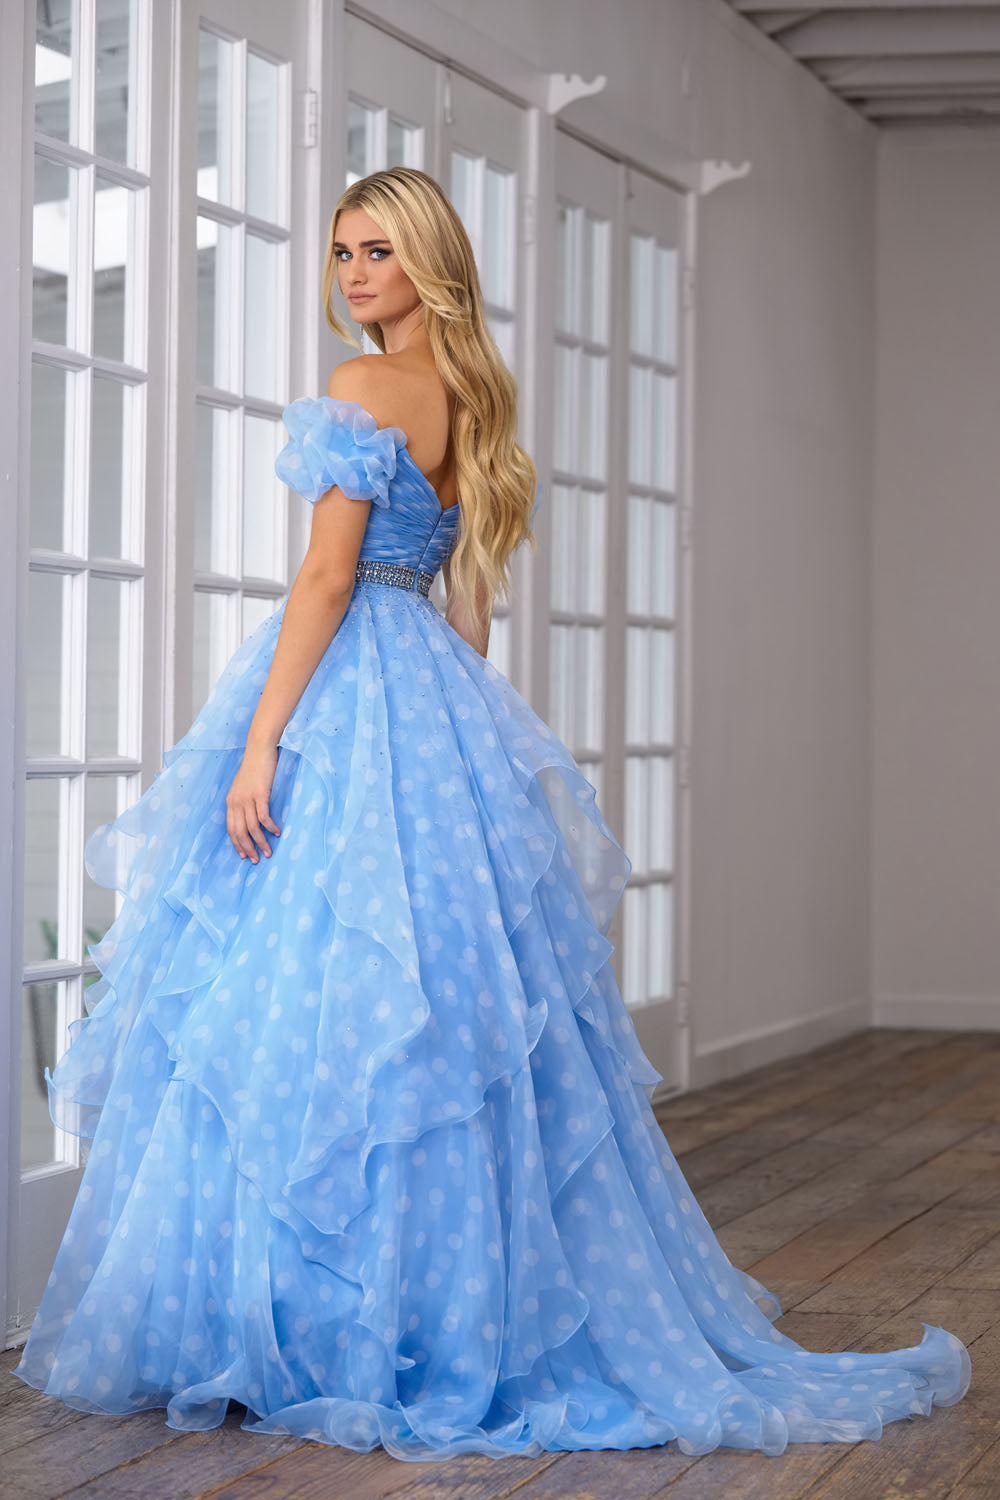 Ava Presley 39318 prom dresses images. Style 39318 by Ava Presley is available in these colors: Black White.